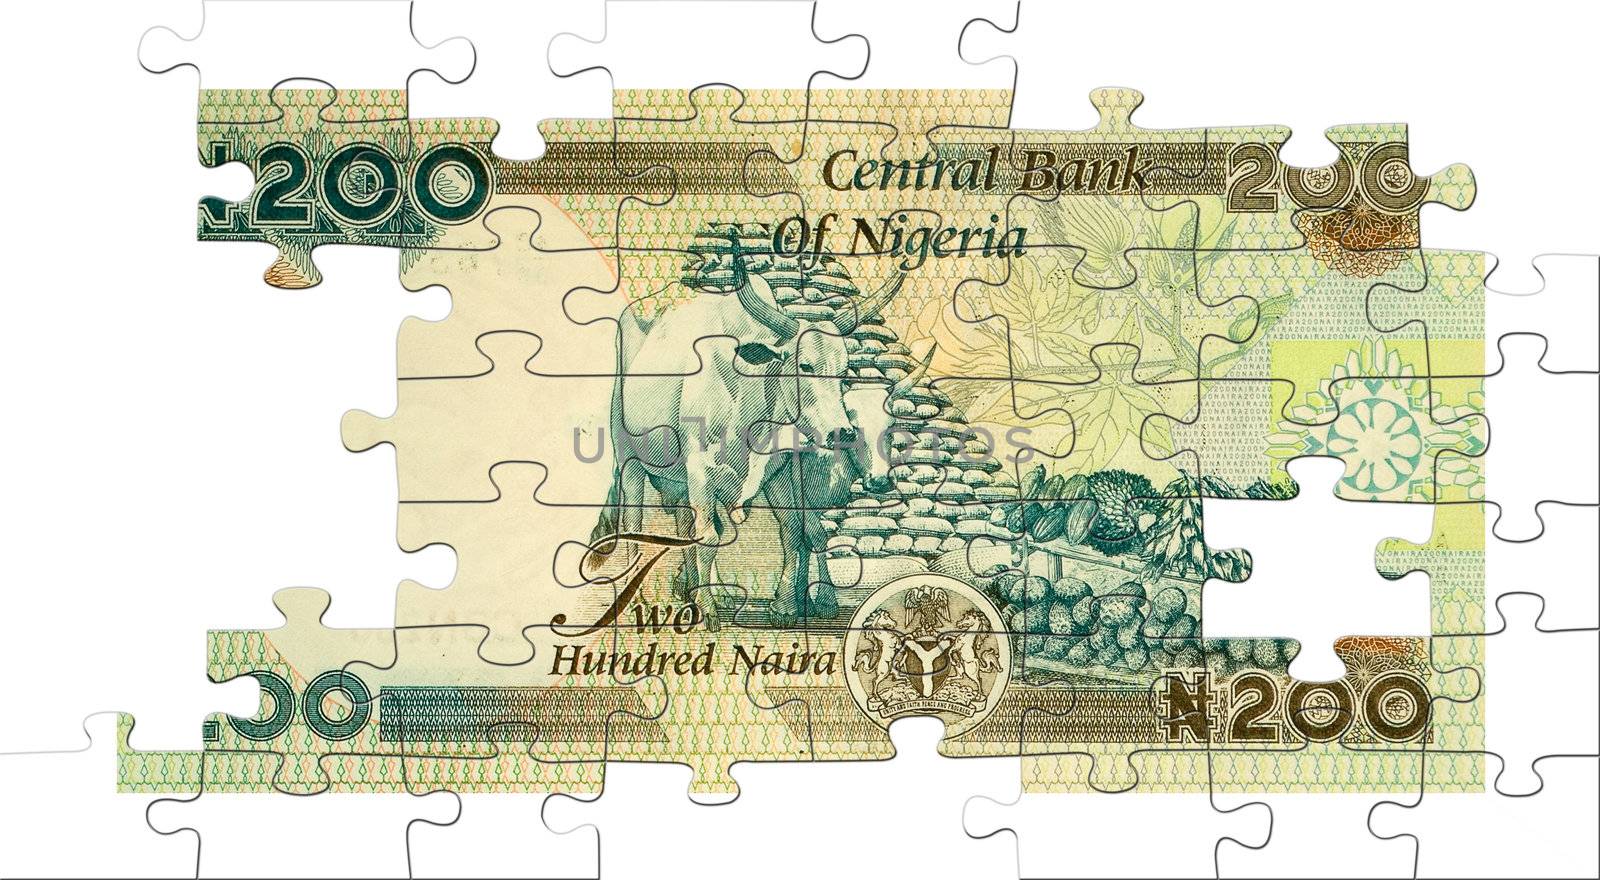 Two hundred naira banknote puzzled on wight